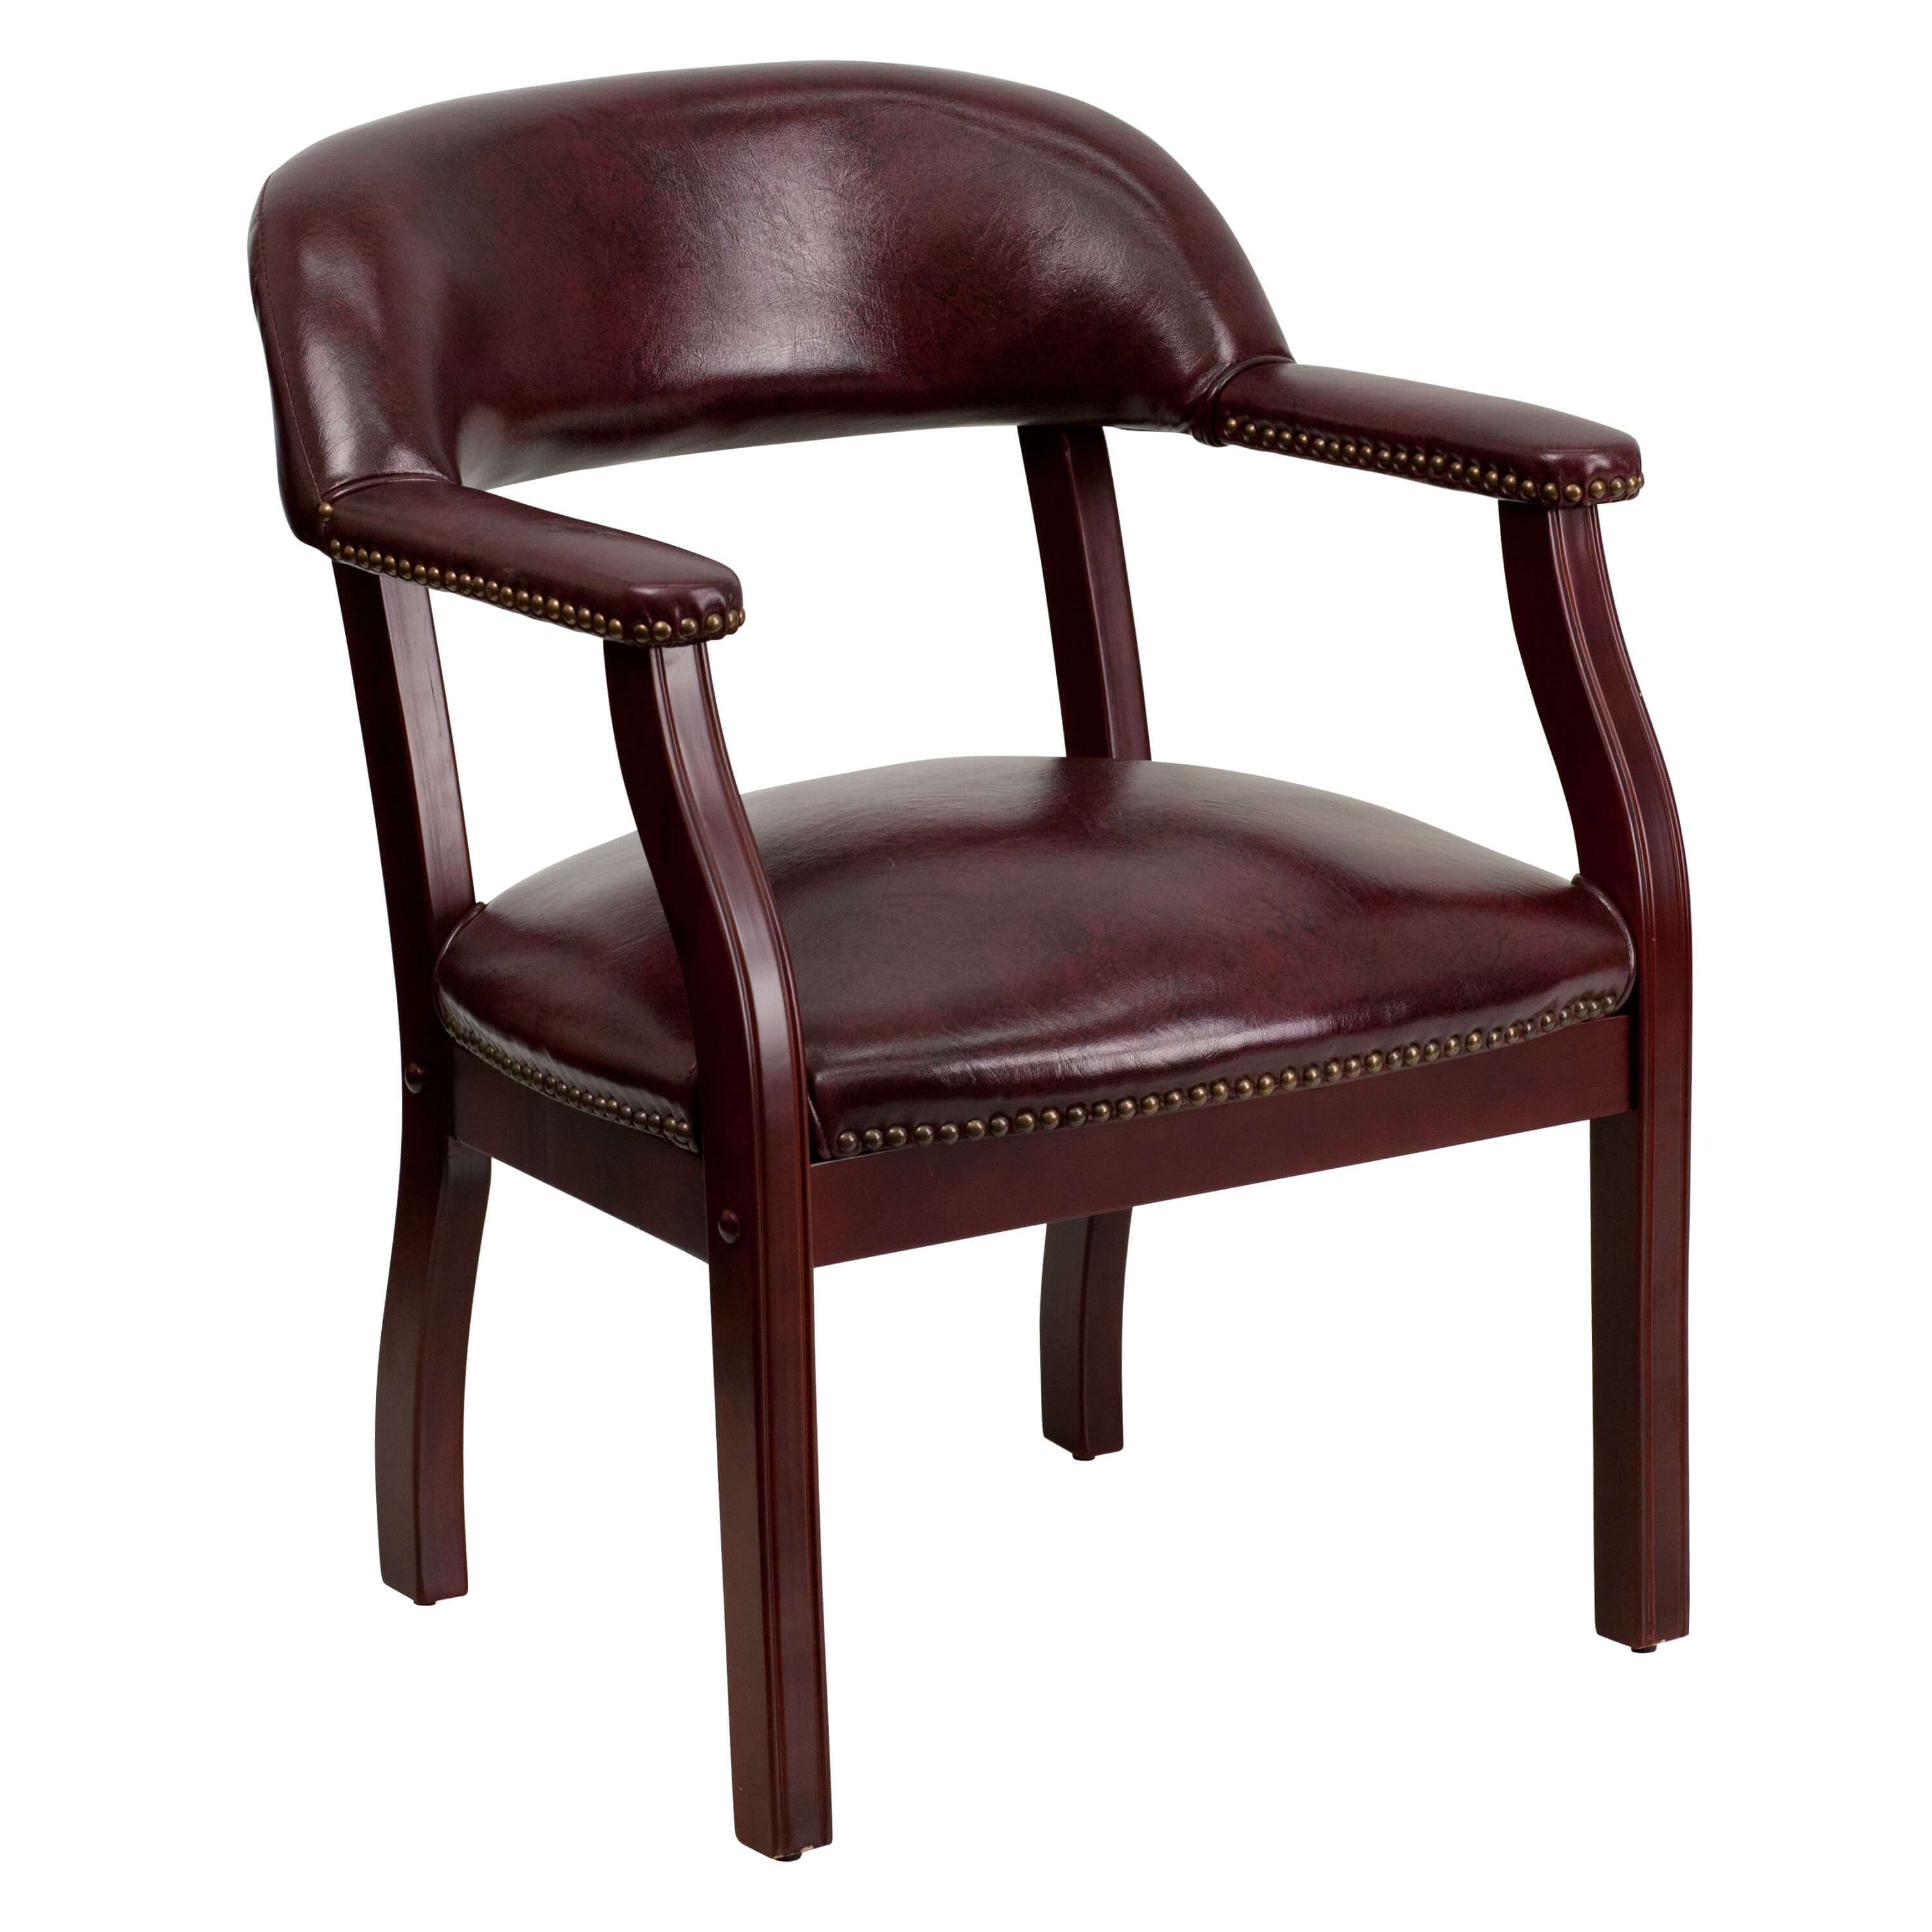 Side chairs with arms CUB B Z105 OXBLOOD GG FLA